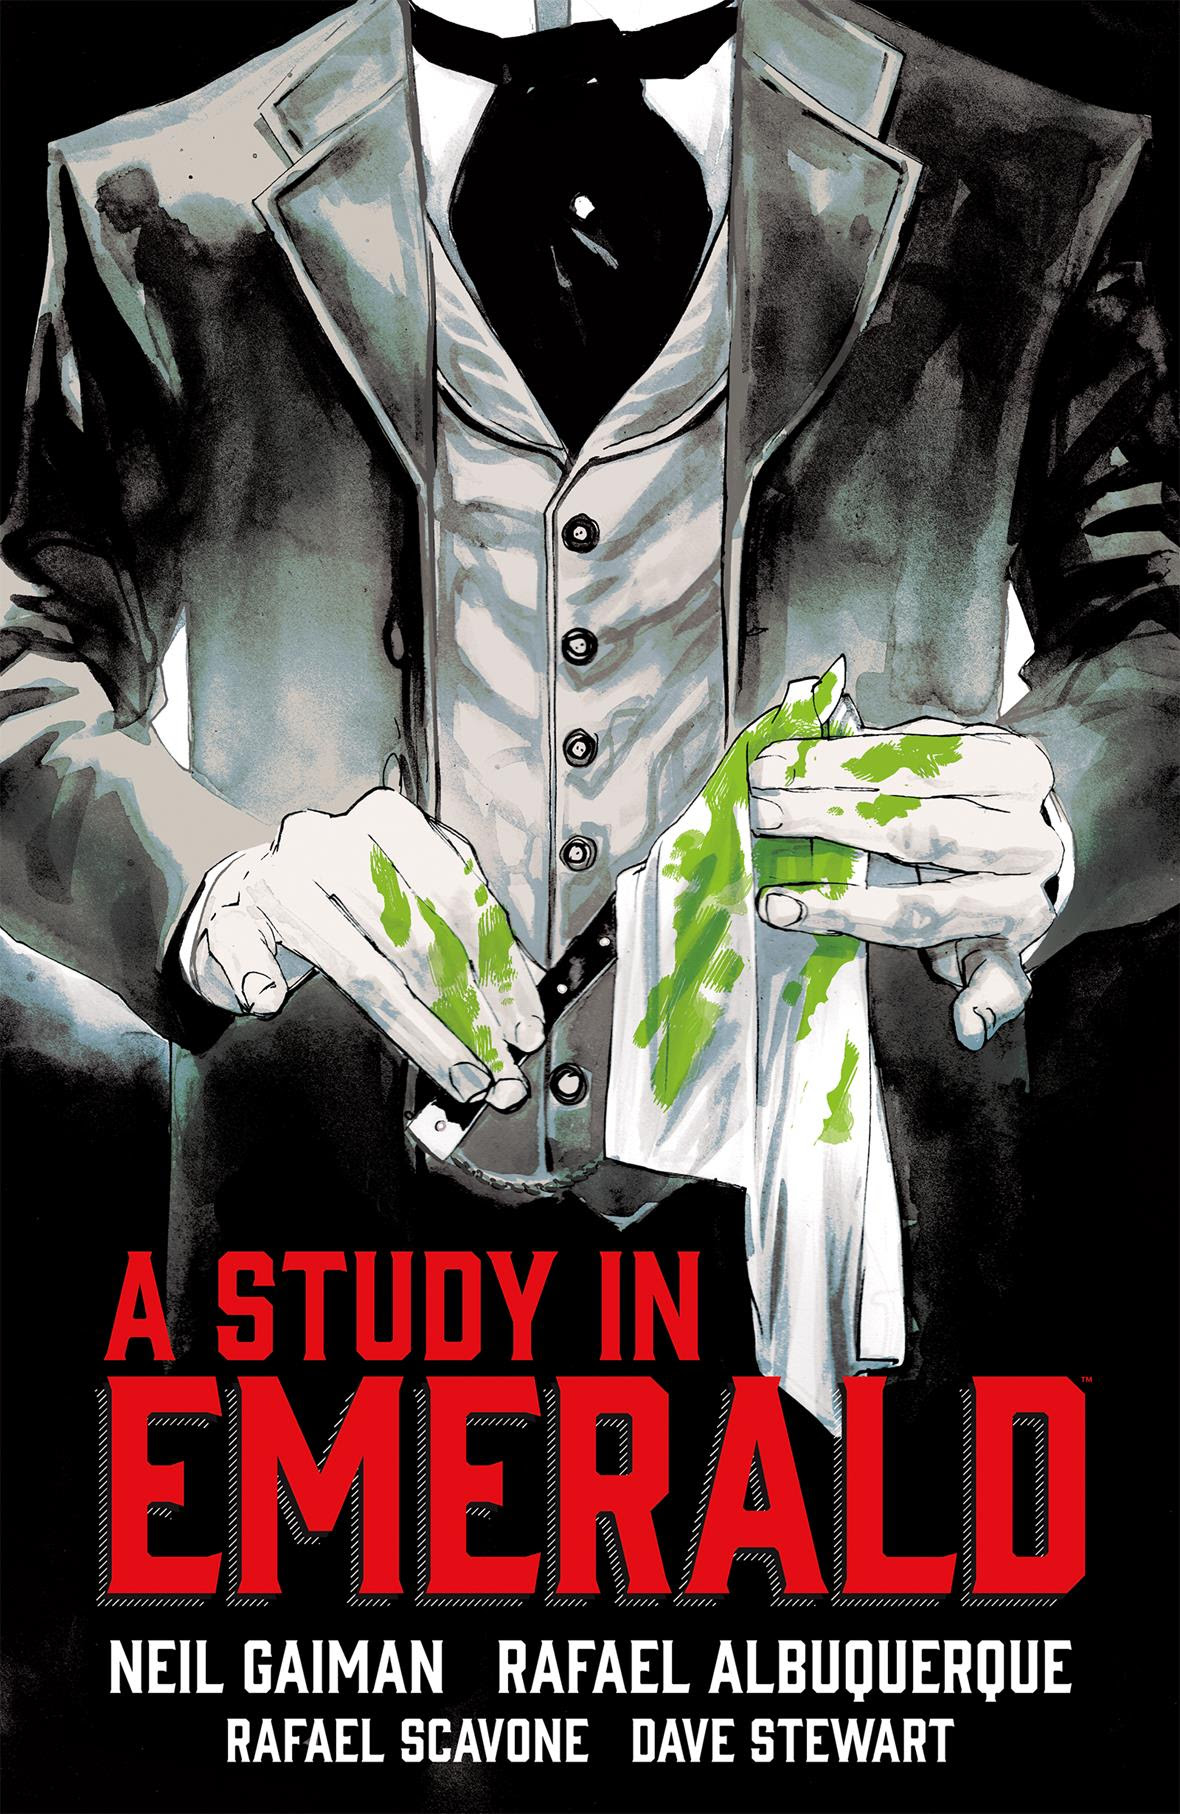 Neil Gaiman’s Sherlock Holmes/Cthulhu Mashup A Study In Emerald Is Being Turned Into A Comic